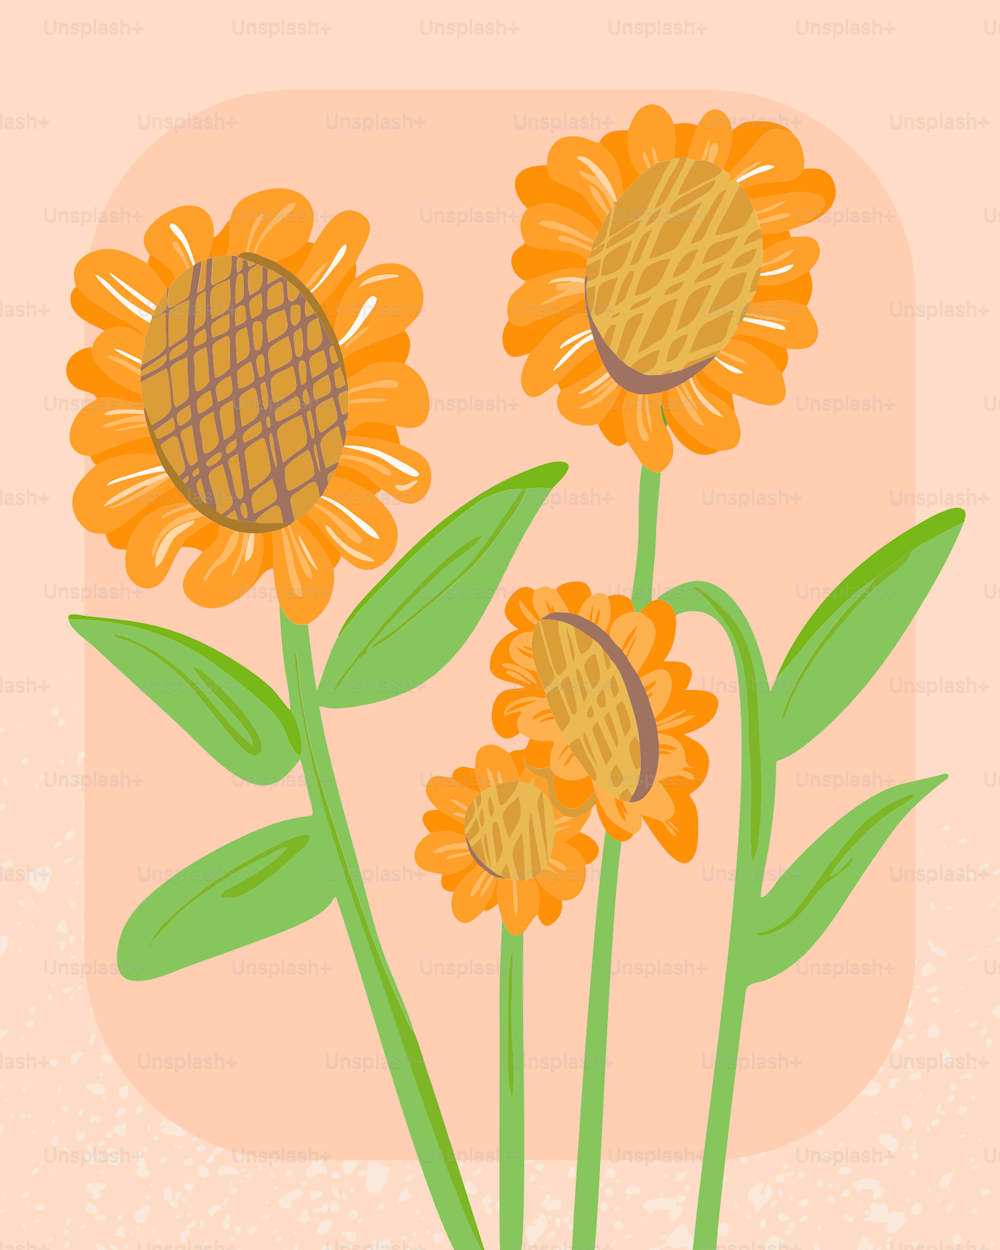 three sunflowers with green leaves on a pink background